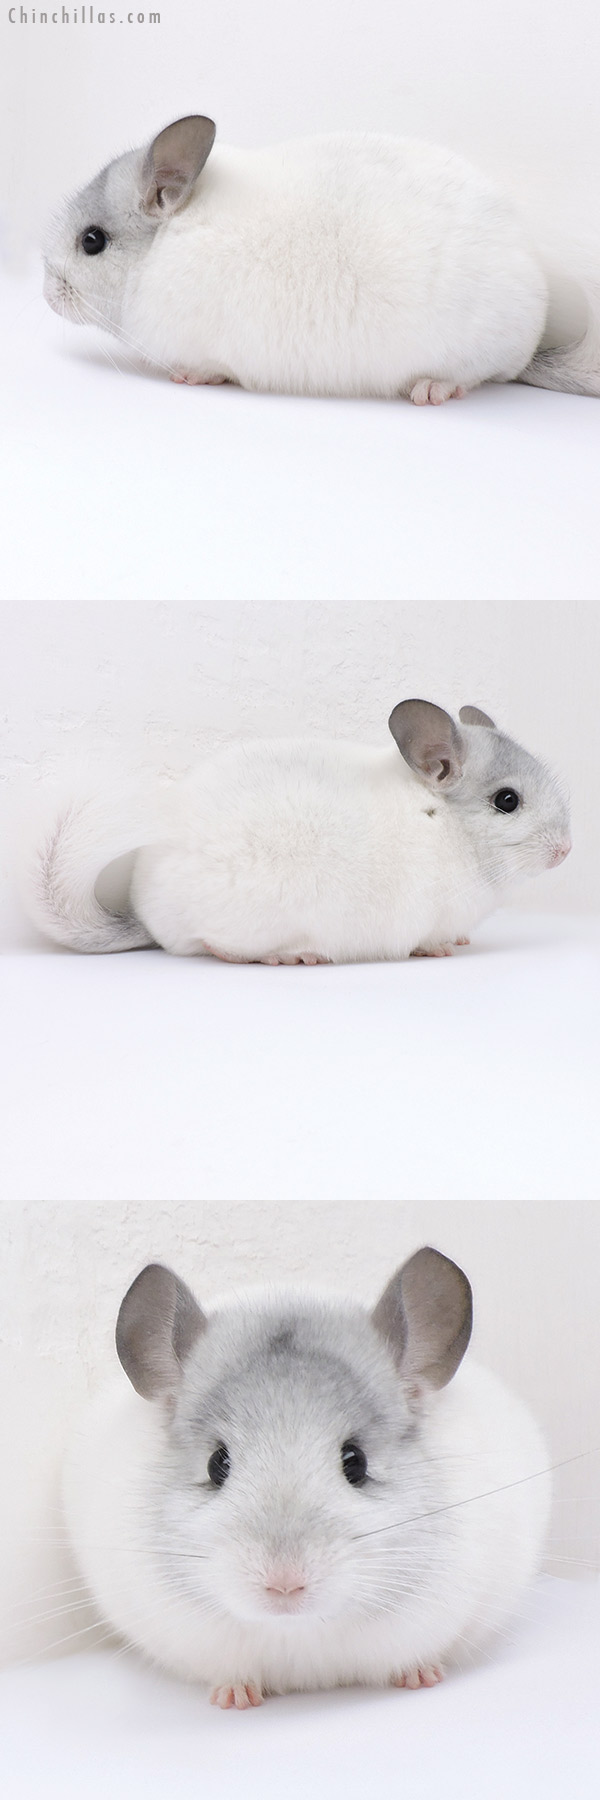 Chinchilla or related item offered for sale or export on Chinchillas.com - 19080 Show Quality White Mosaic Female Chinchilla